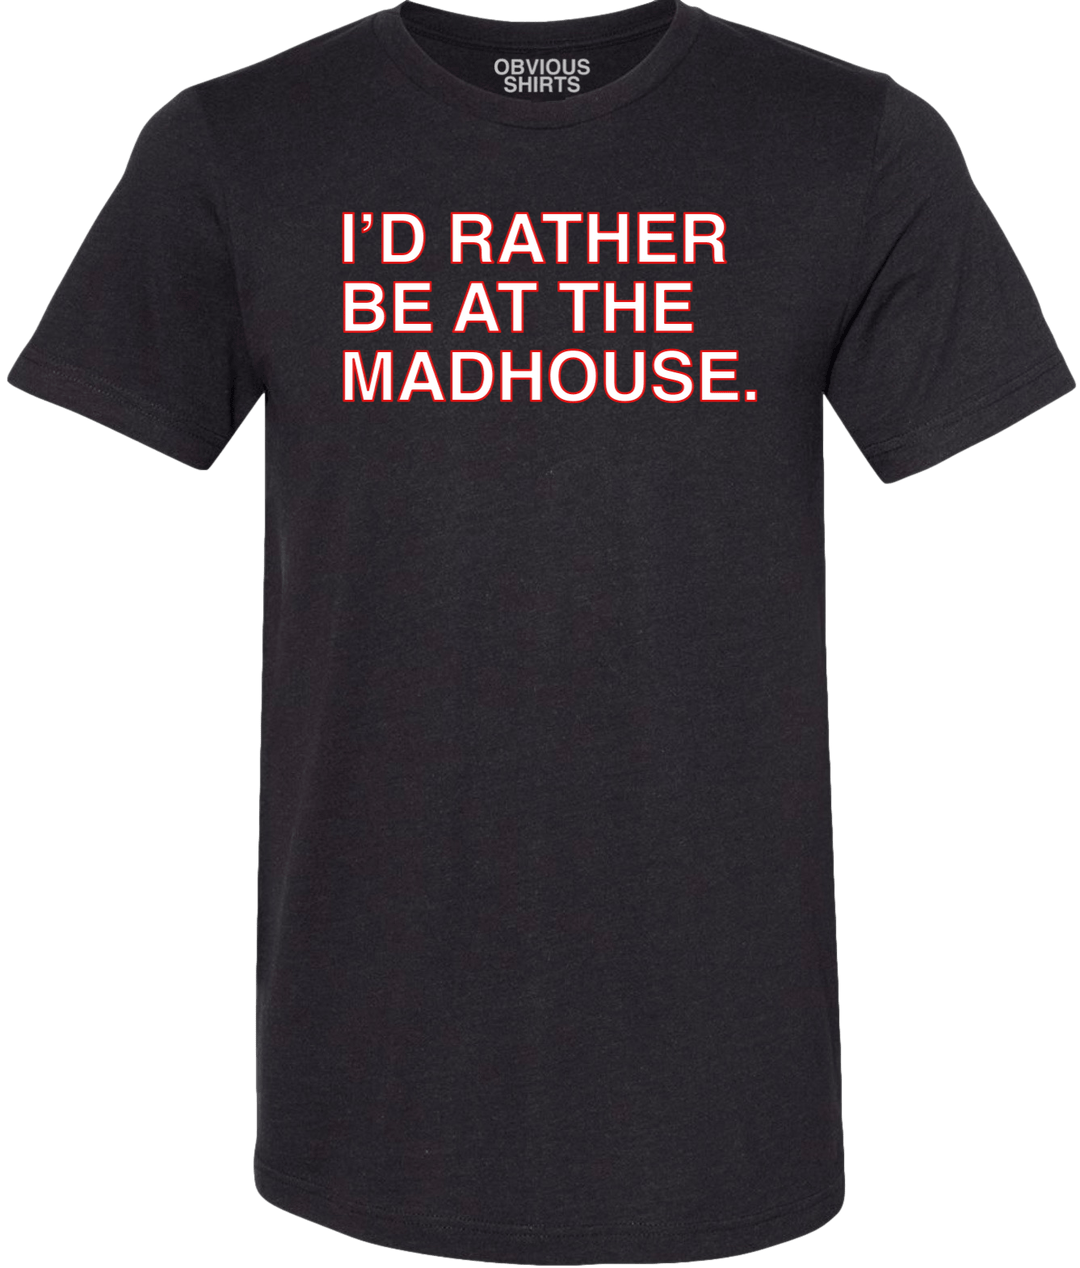 I'D RATHER BE AT THE MADHOUSE. (BLACK) - OBVIOUS SHIRTS